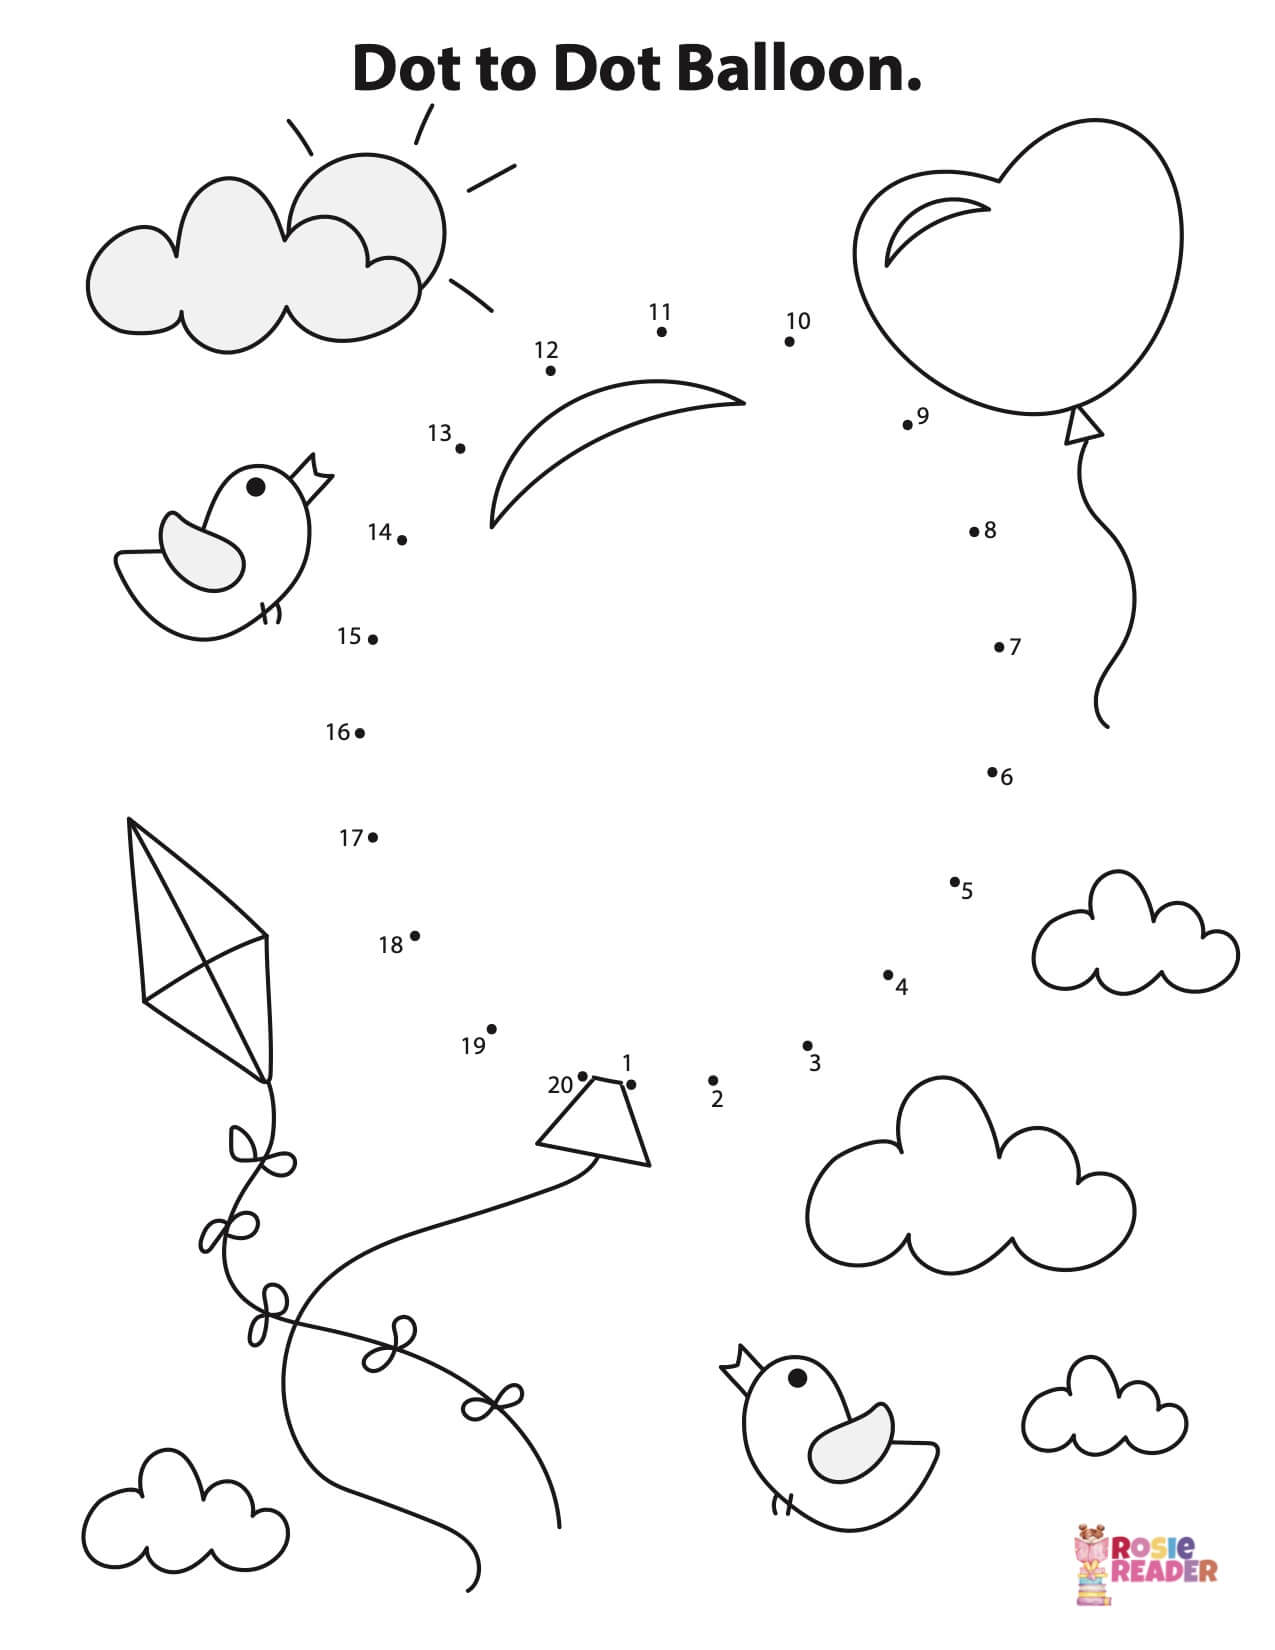 Dot-to-Dot Balloon - Reading adventures for kids ages 3 to 5